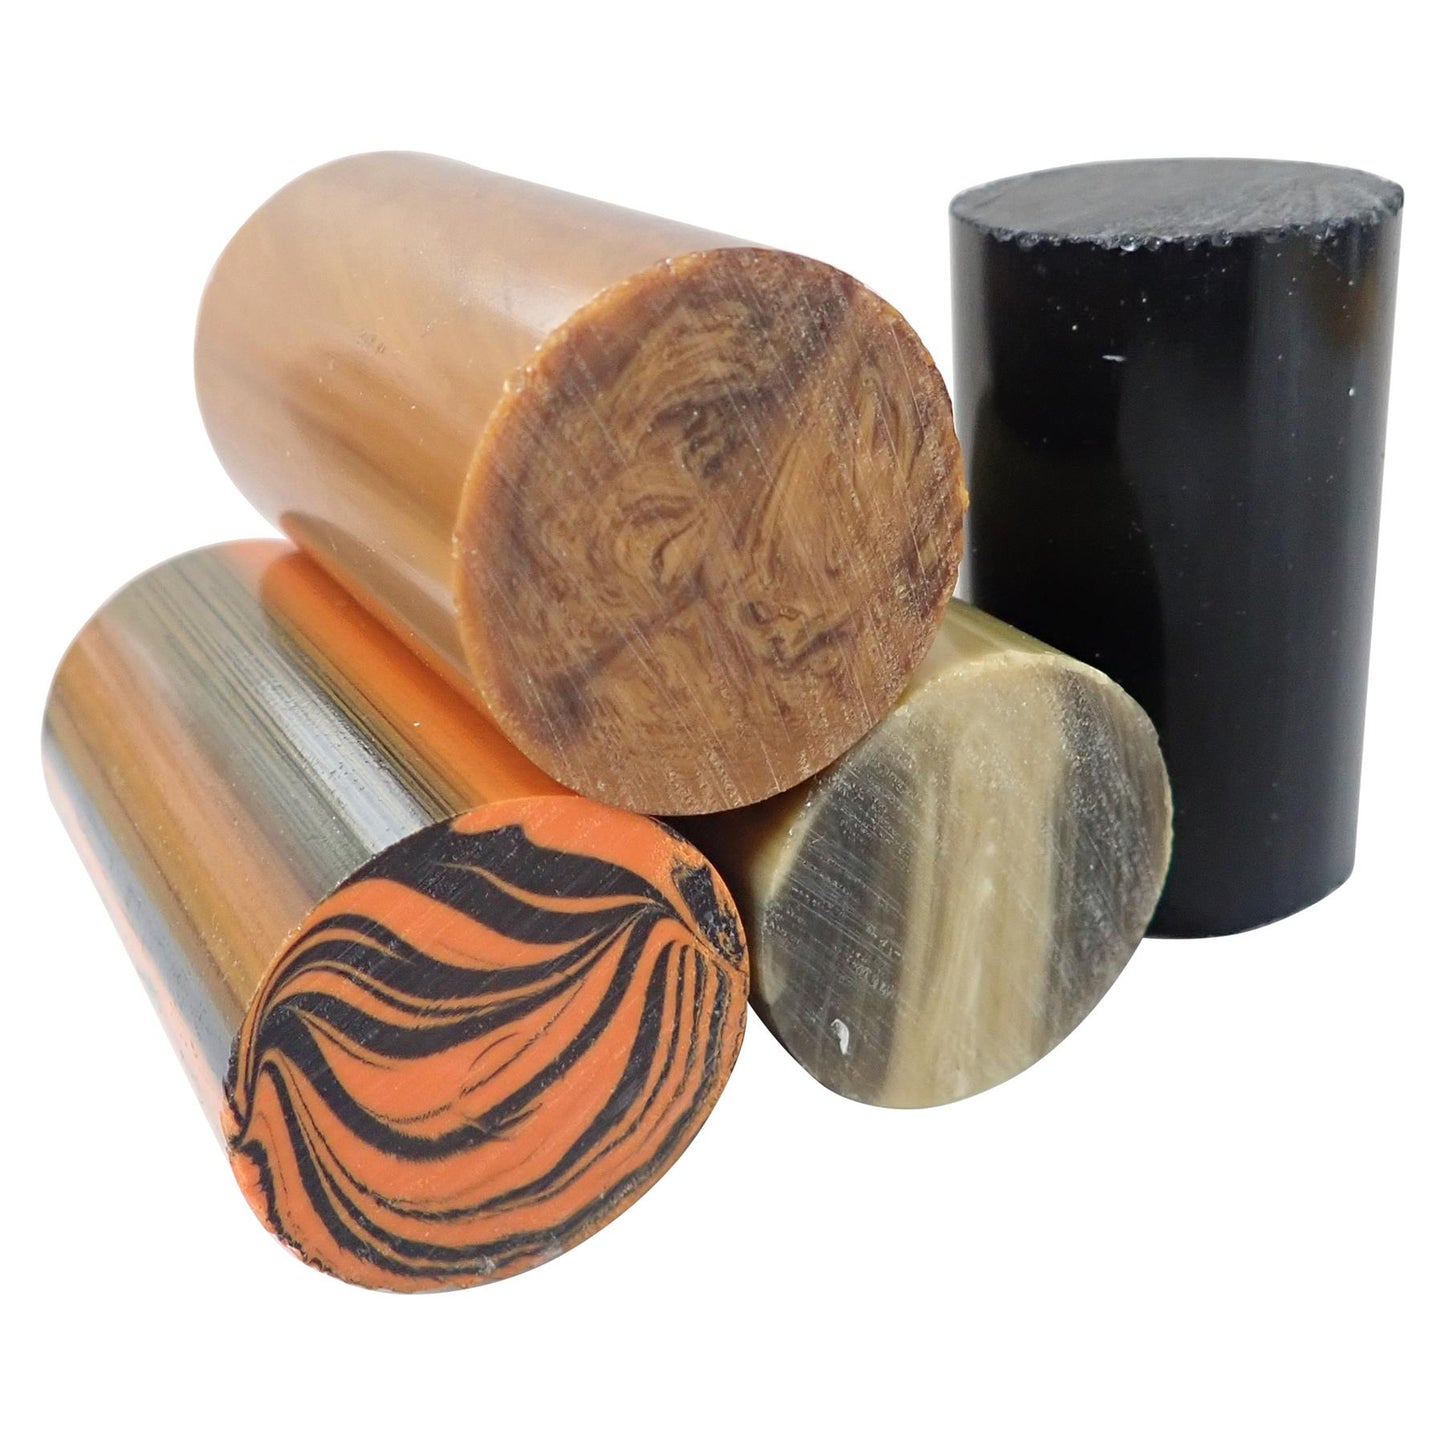 [Turners' Mill] Mixed Polyester Turning Blanks - 63.5x39x39mm, Set of 4